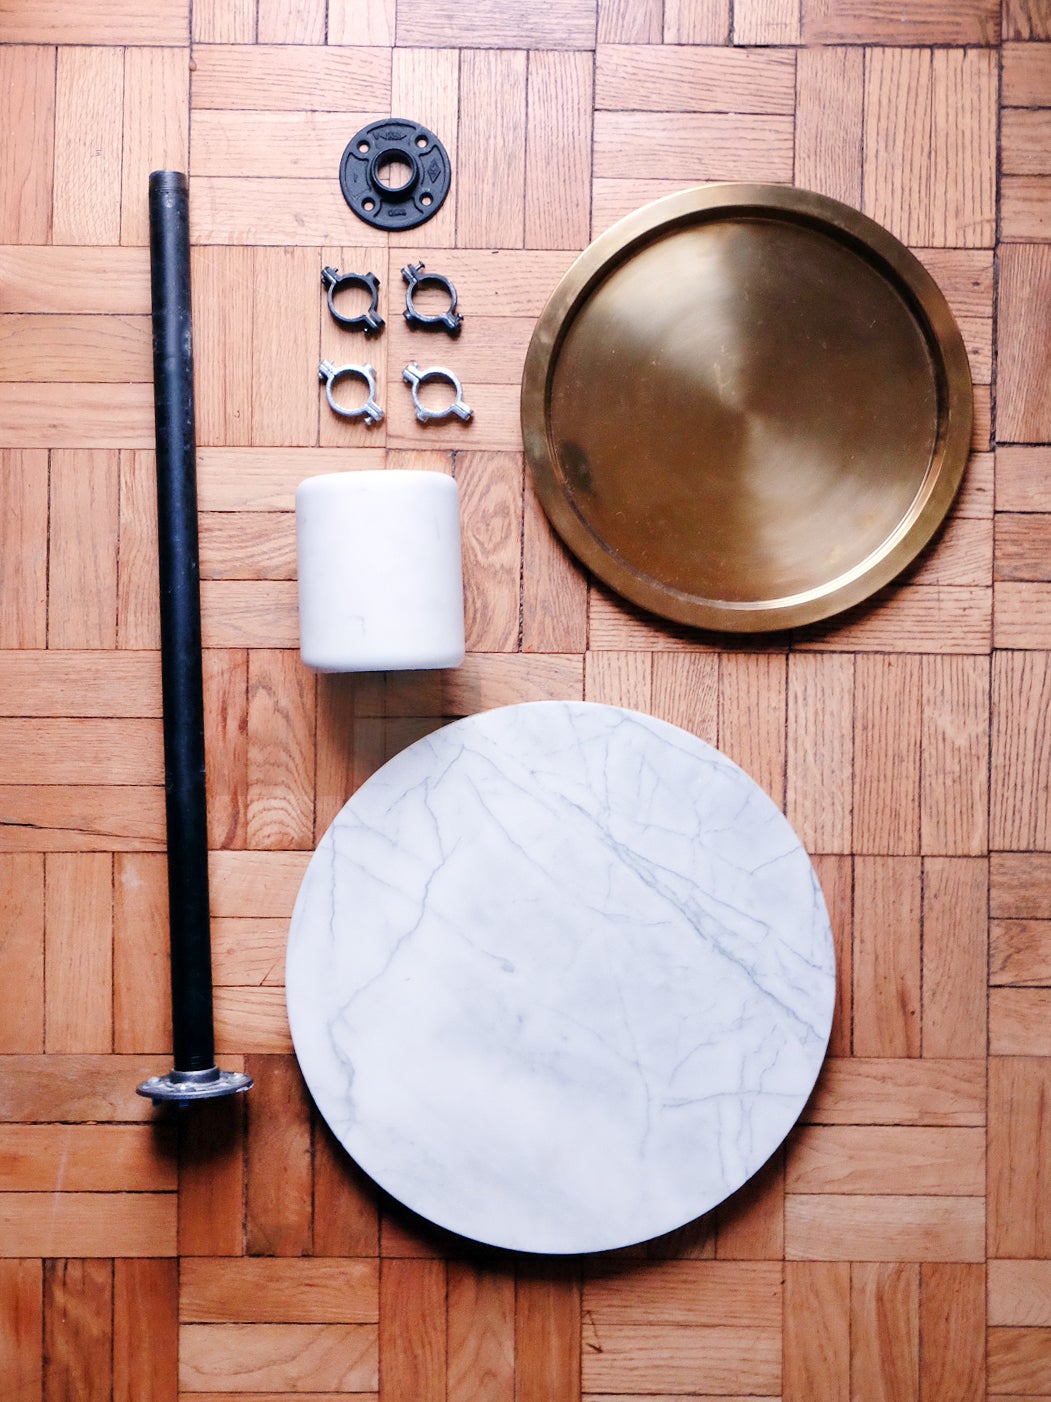 A Lazy Susan, IKEA Tray, and Utensil Holder Make for a Luxe-Looking Nightstand